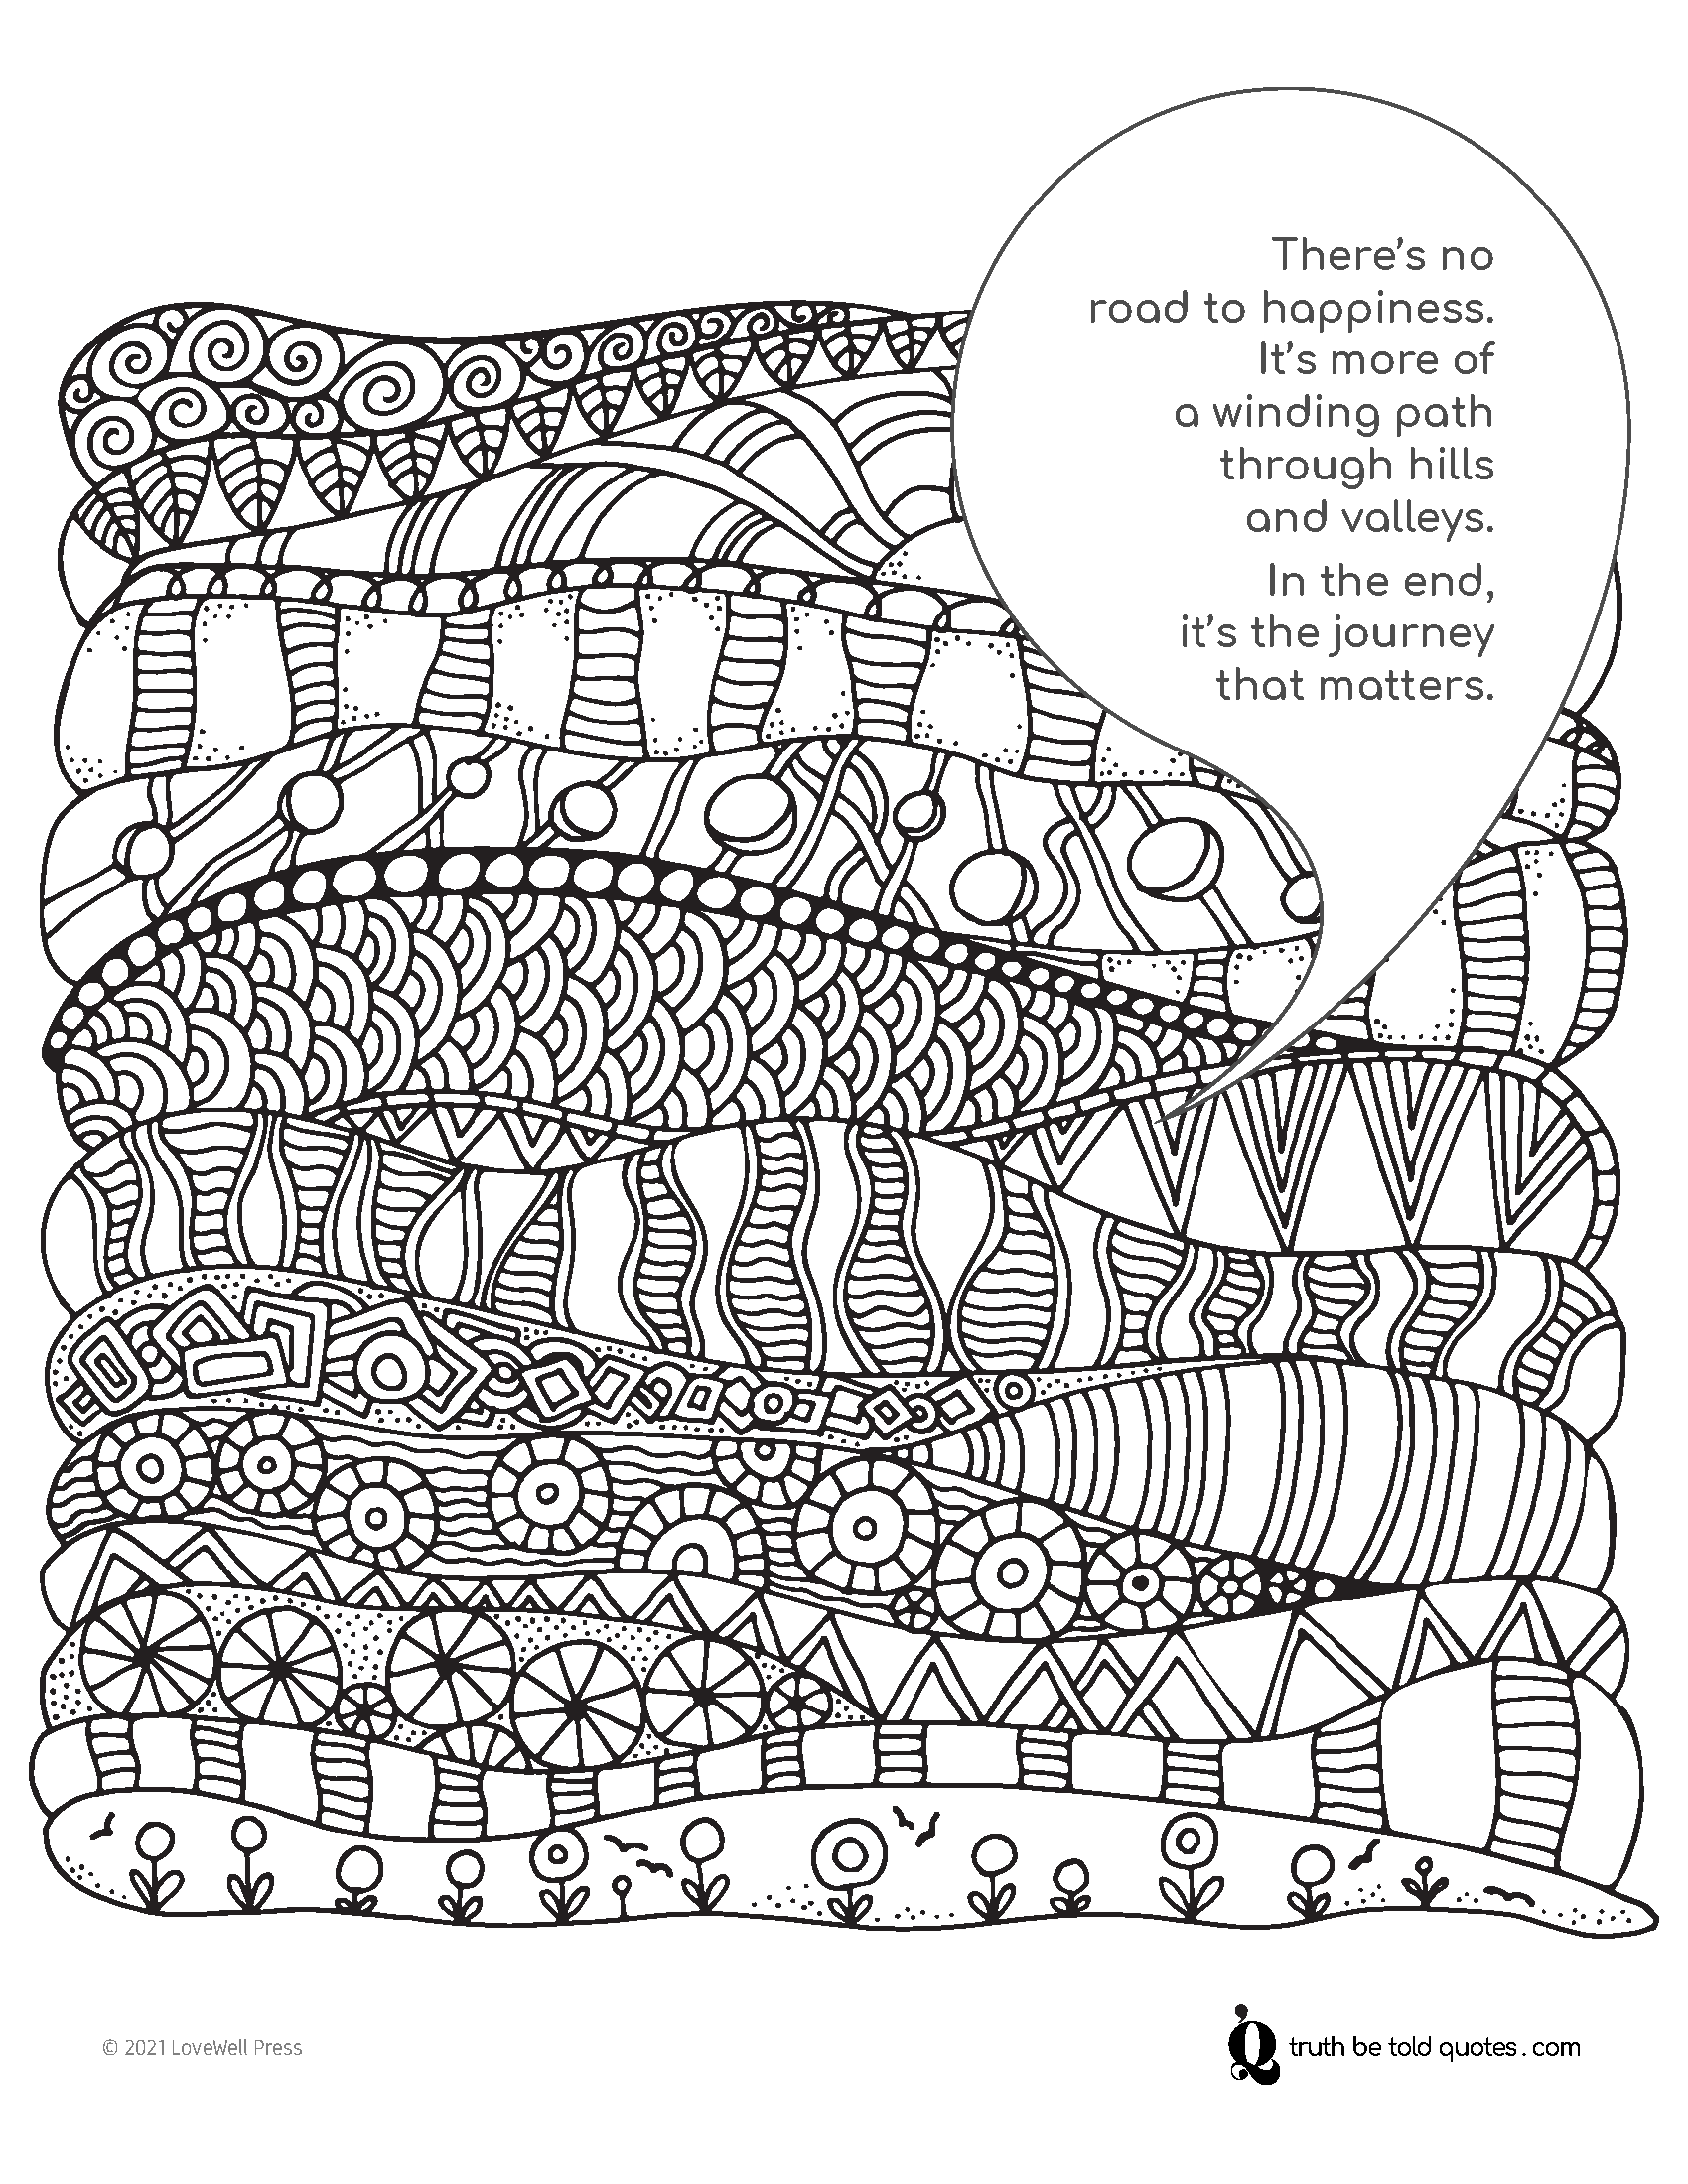 Free mindfulness coloring page with quote about there's no road to happiness with image of zentangle style paths to color